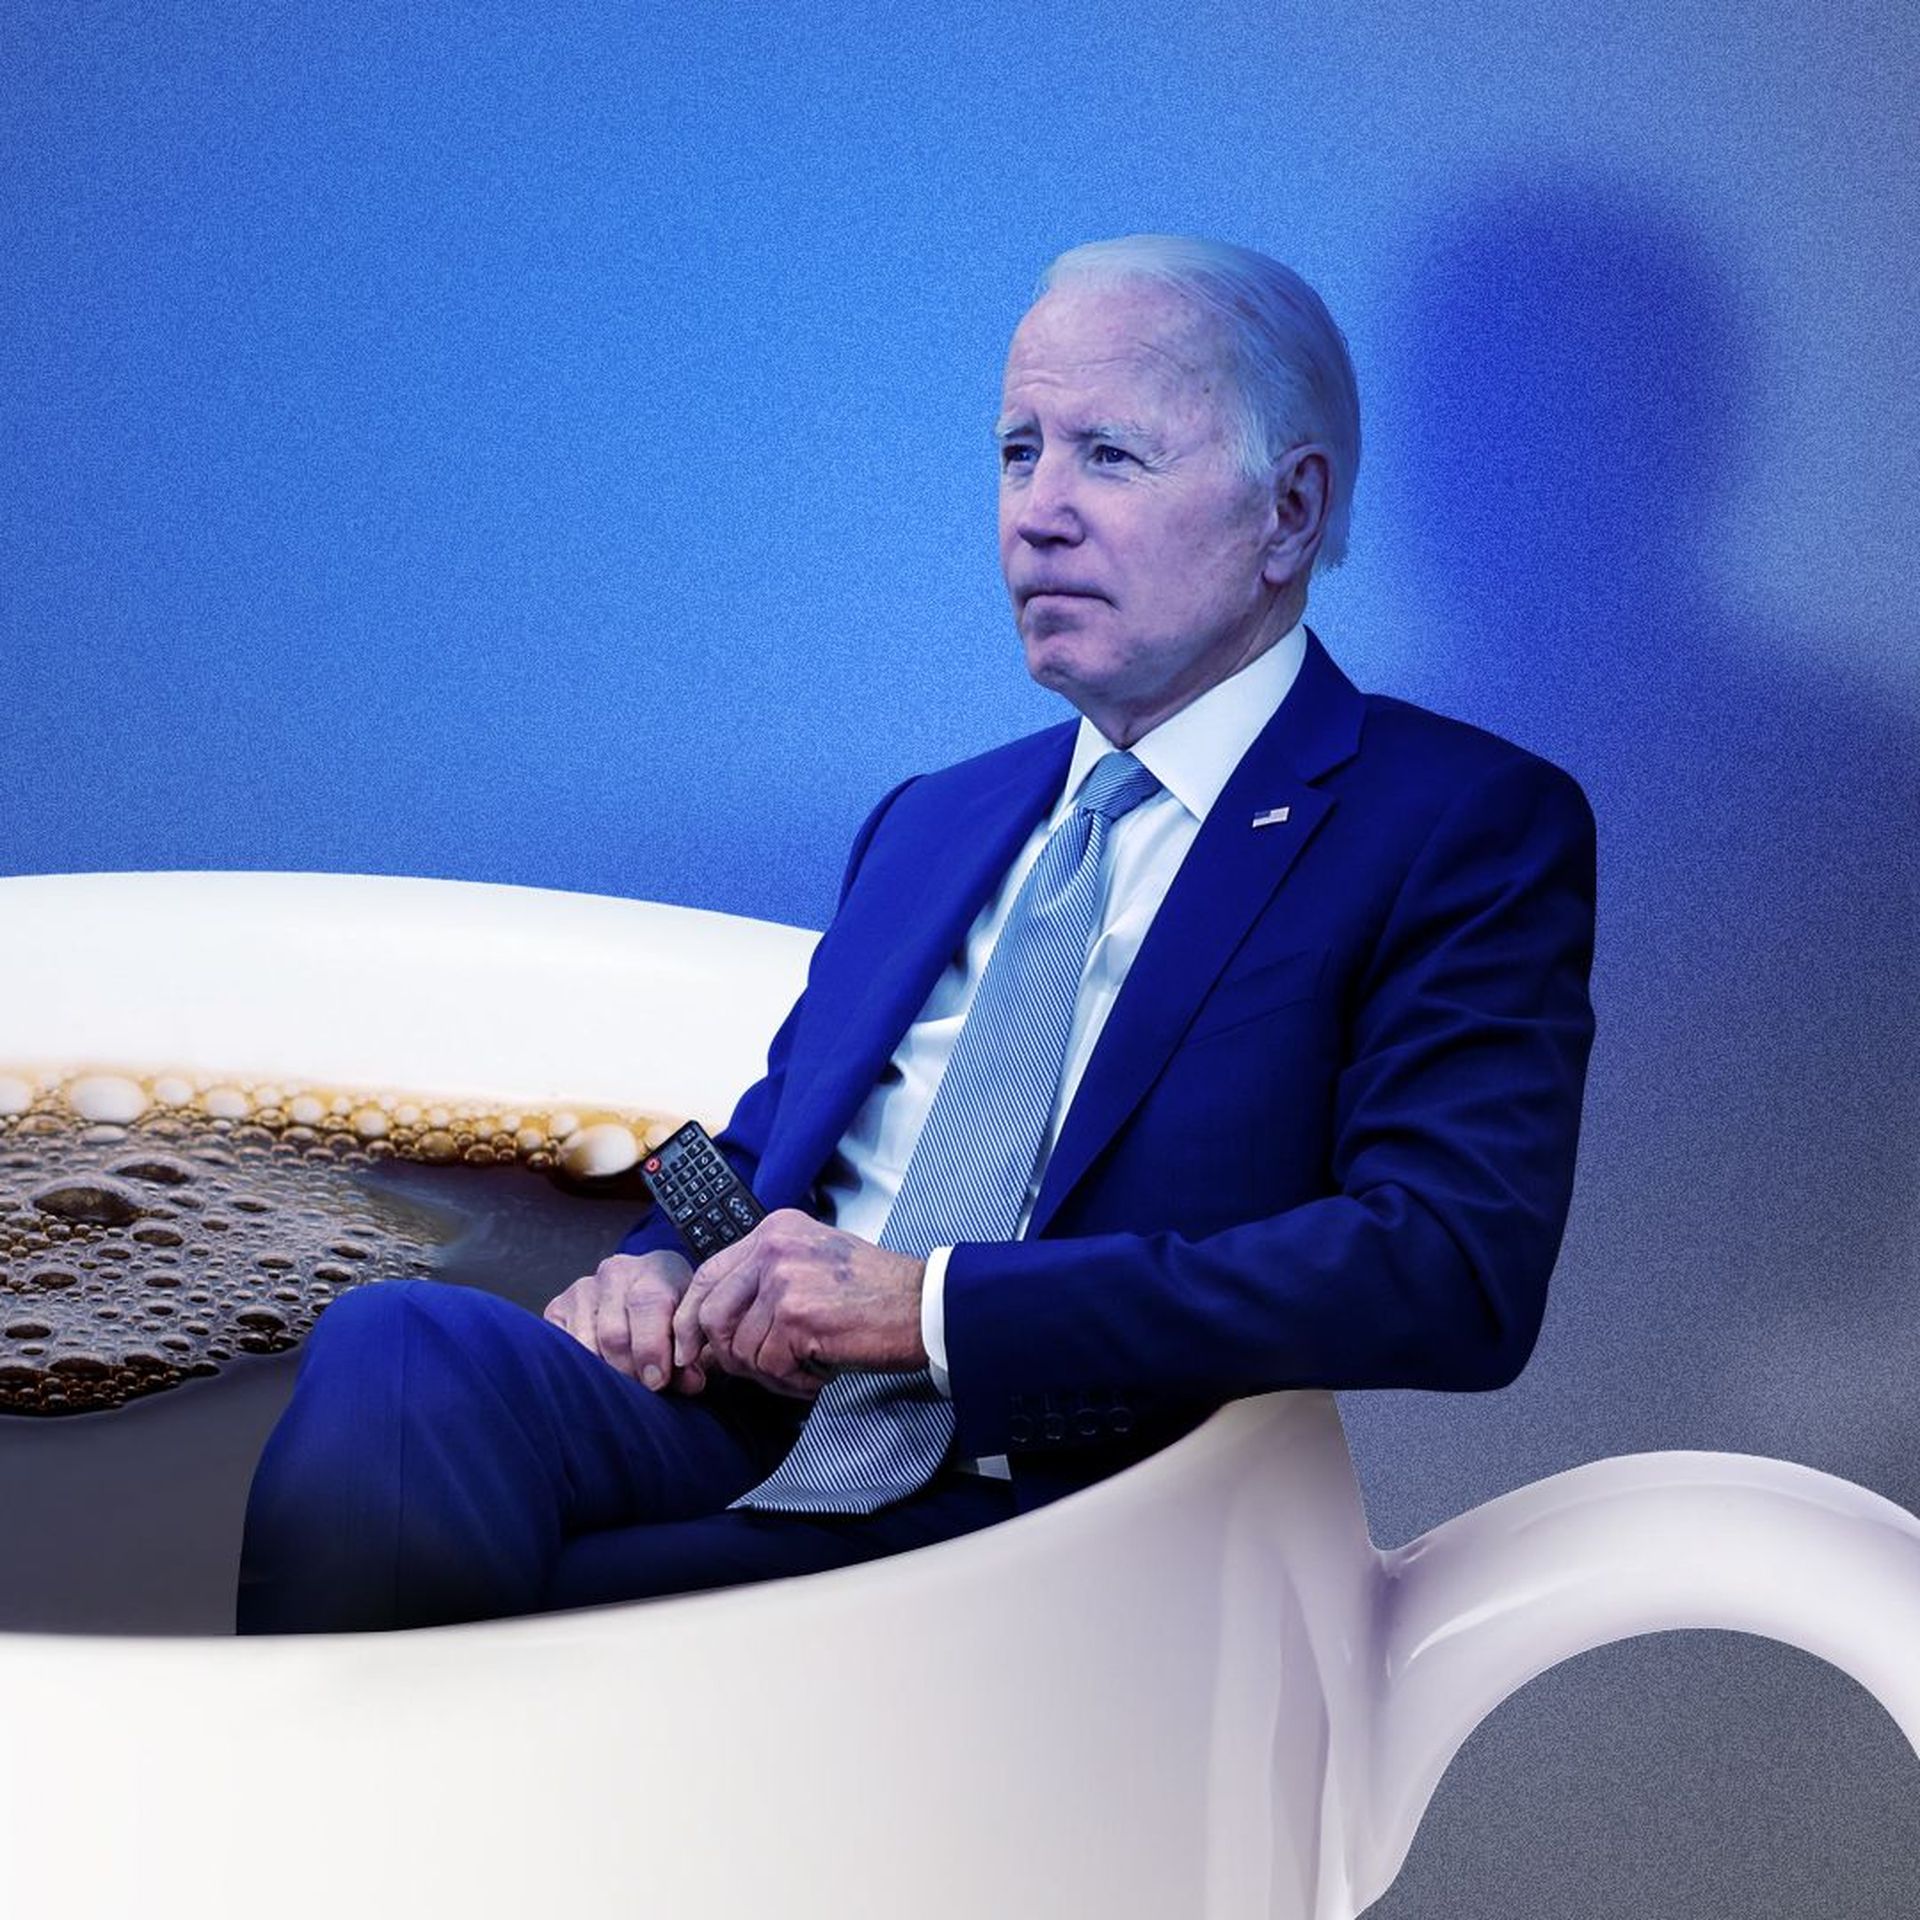 Photo Illustration of Joe Biden sitting in a large cup of coffee with the glow of a screen projected onto him